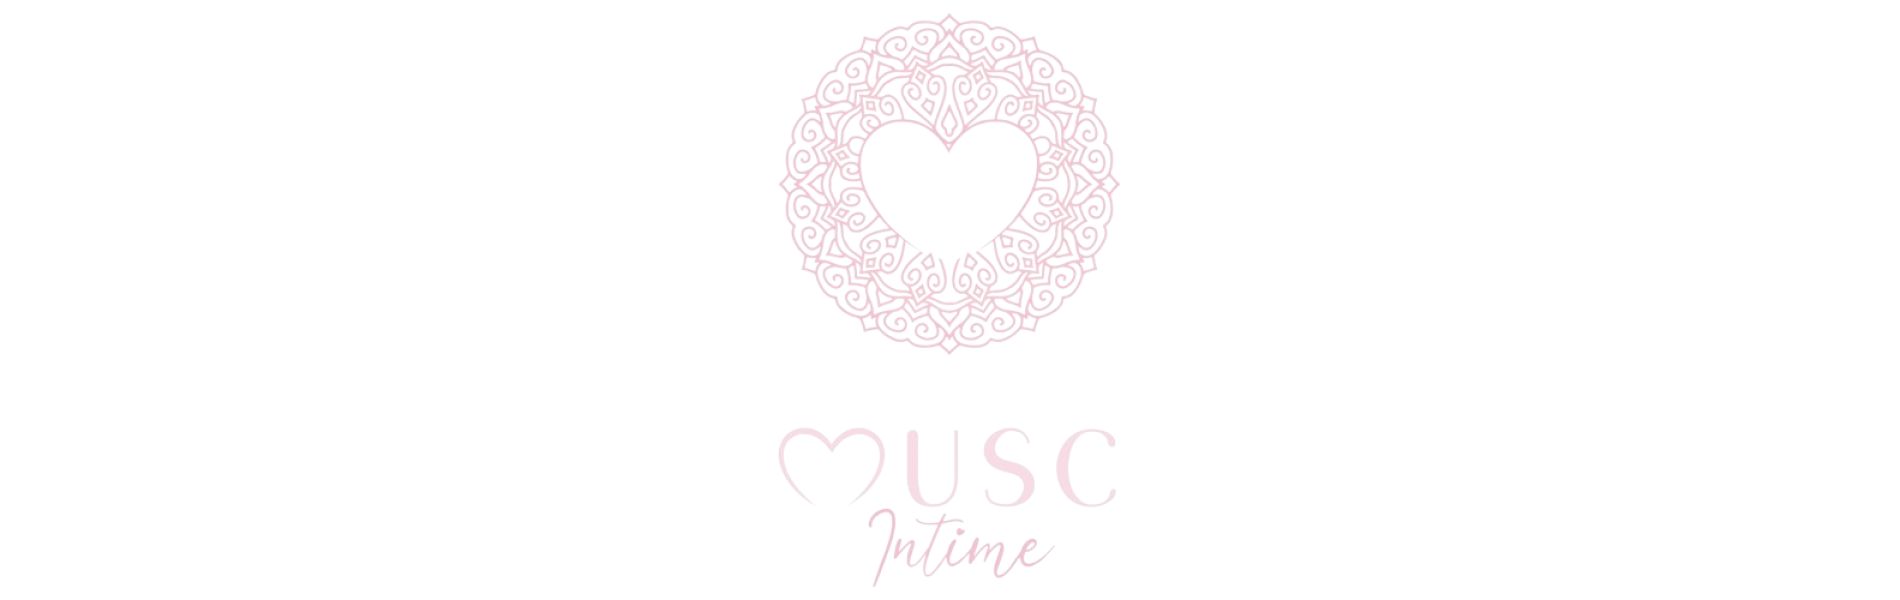 Musc Intime